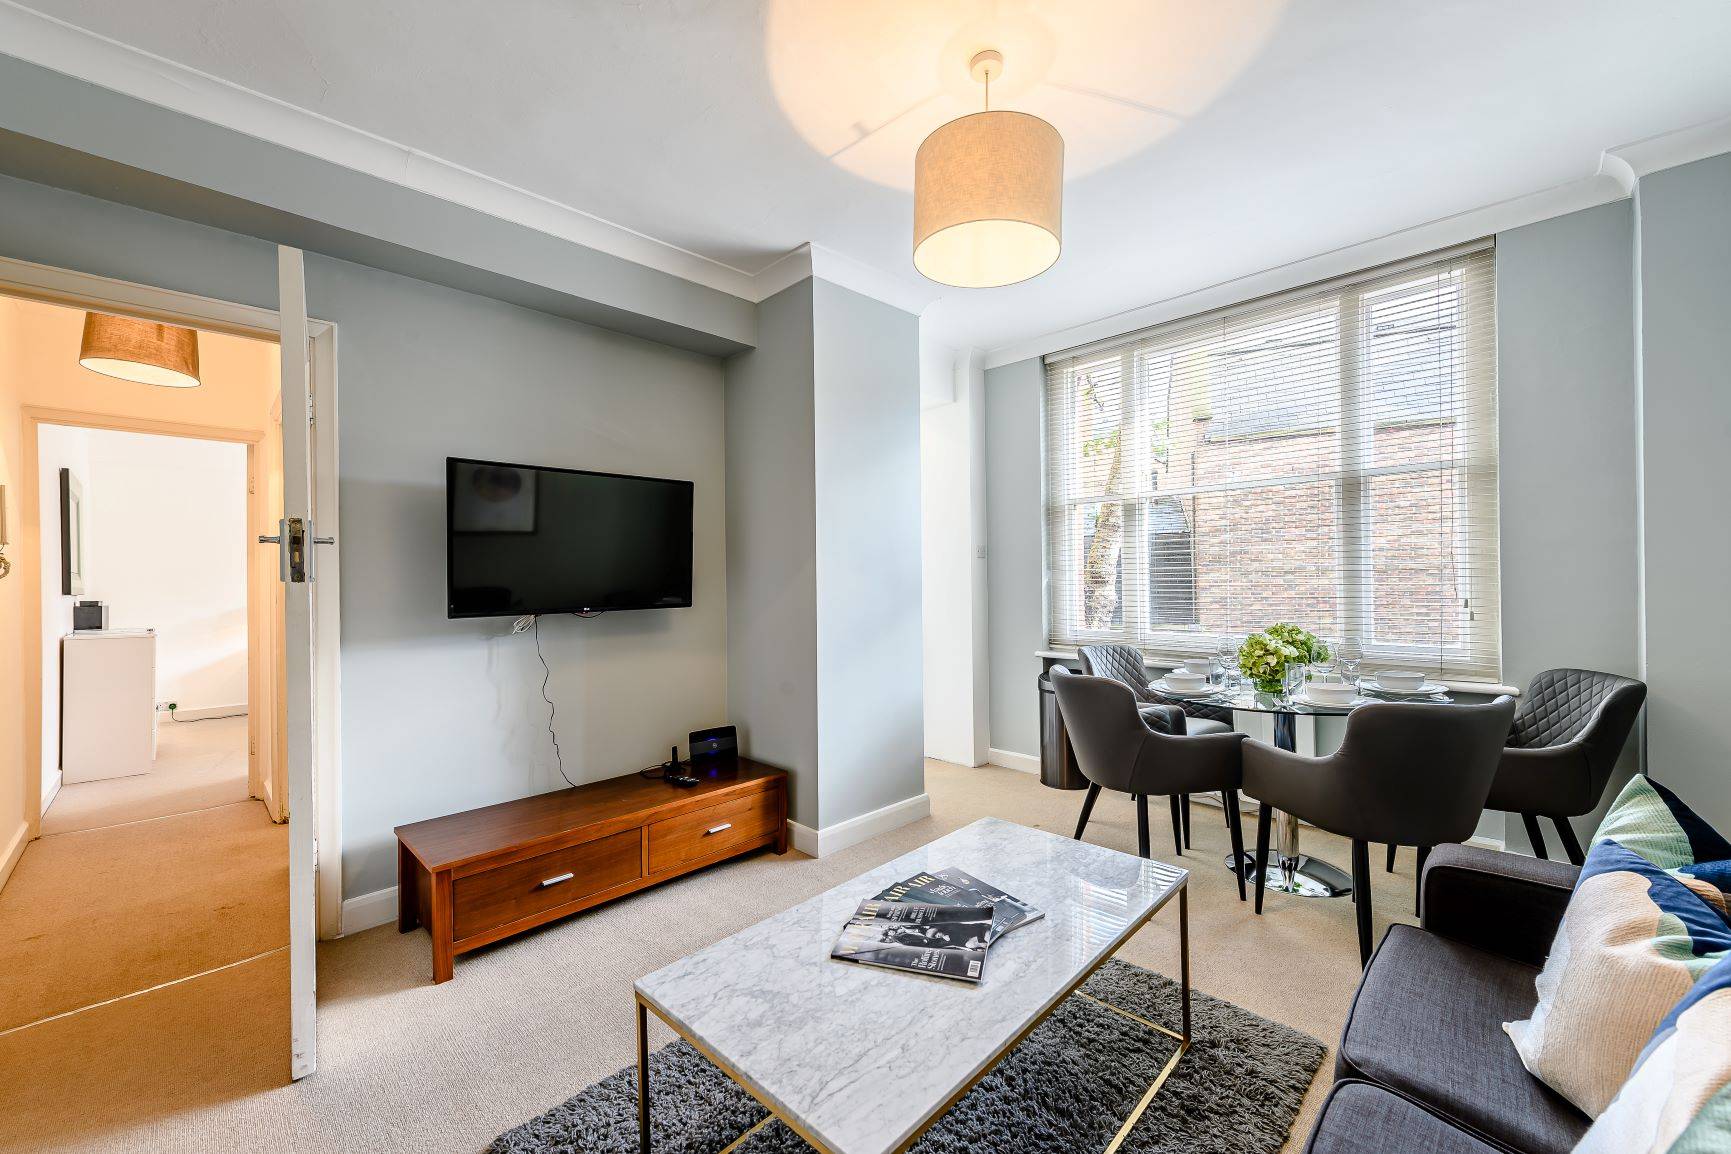 A modern one-bedroom apartment in the heart of Mayfair.  The apartment is over 438 sq ft with a large double bedroom, modern fitted bathroom, spacious reception room with rear facing views over Hay’s Mews.